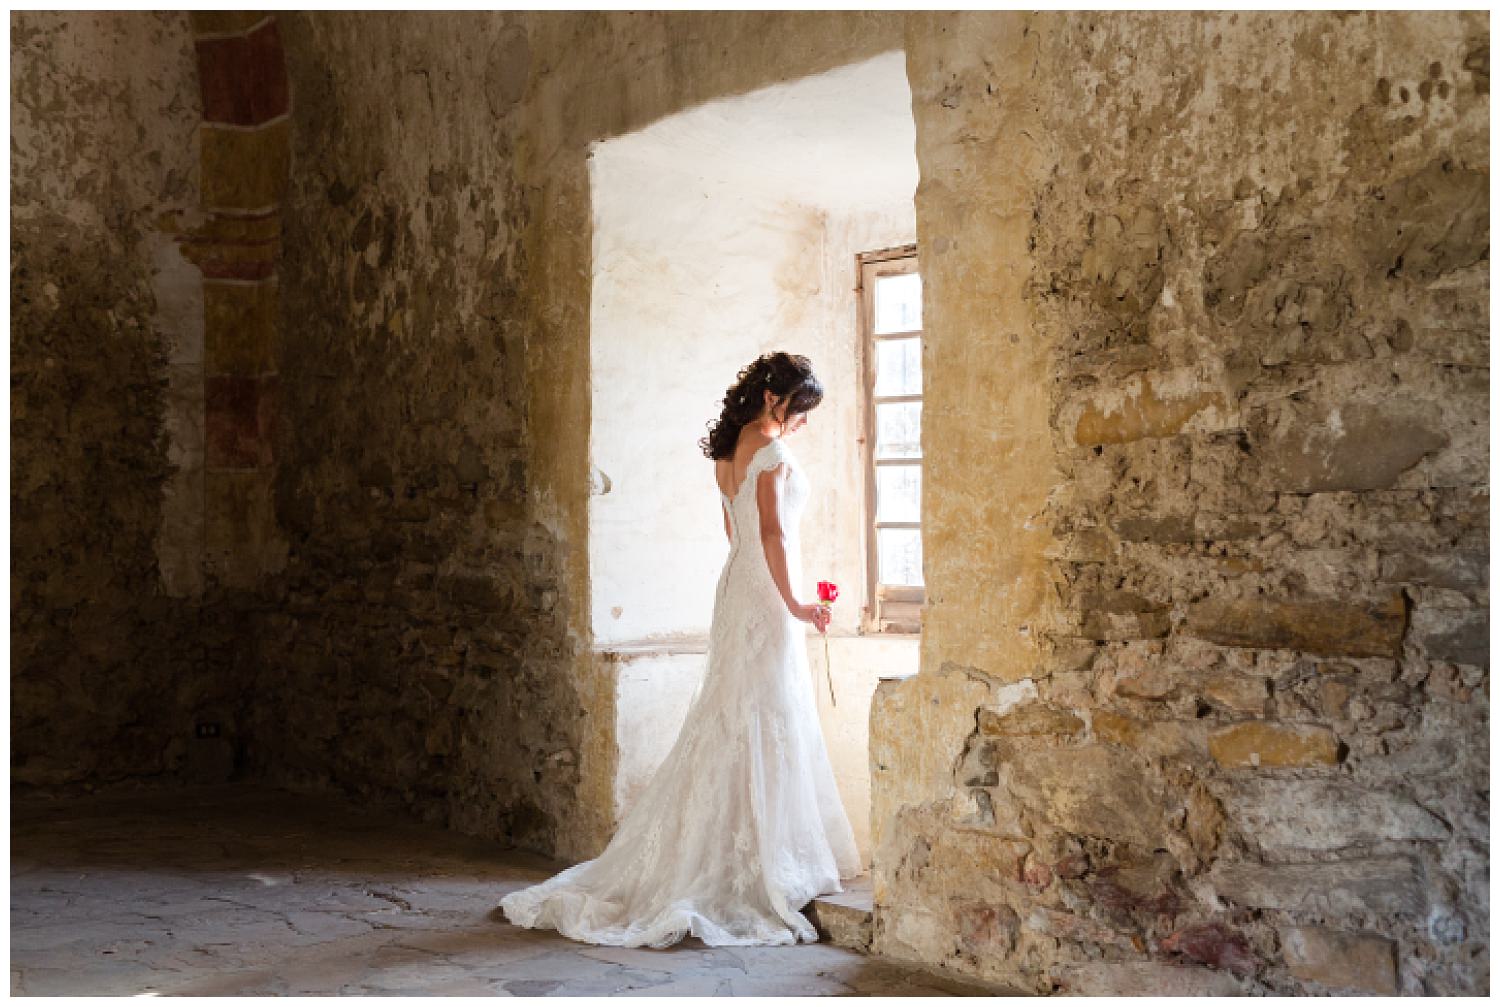 Bridal Session at Mission San Jose by Splendored Photography